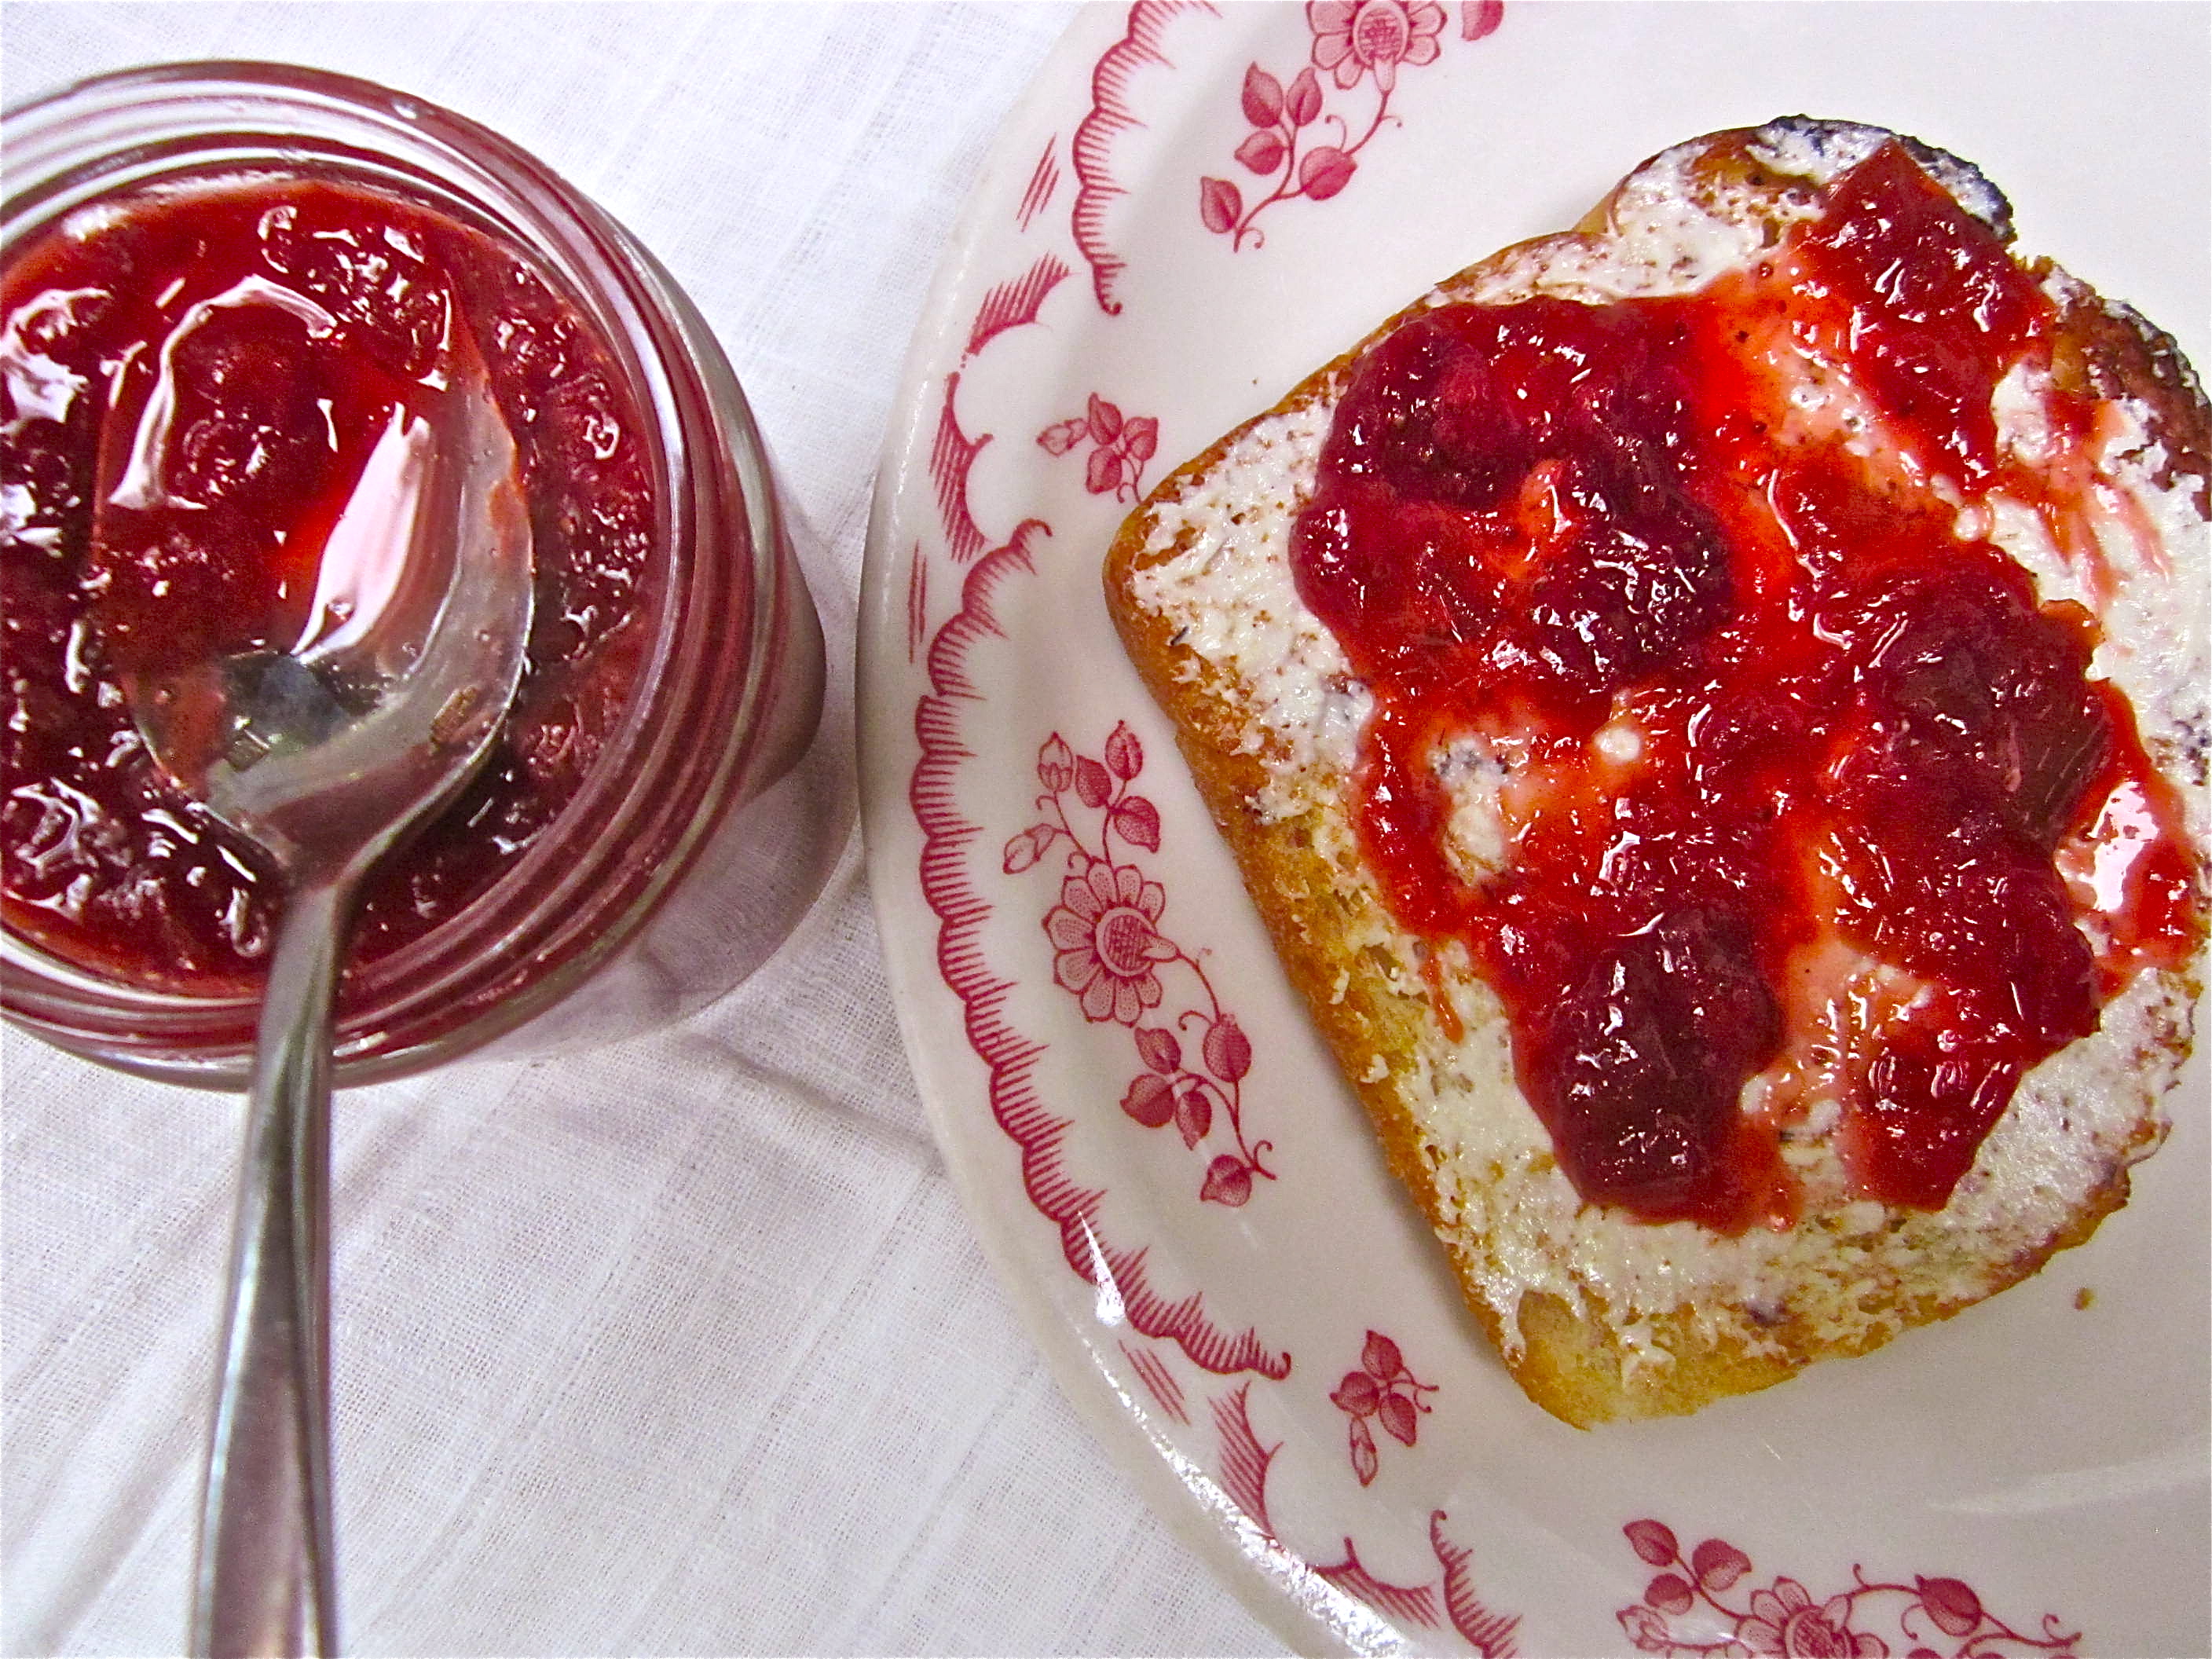 Oven-cooked Strawberry Rhubarb Jam